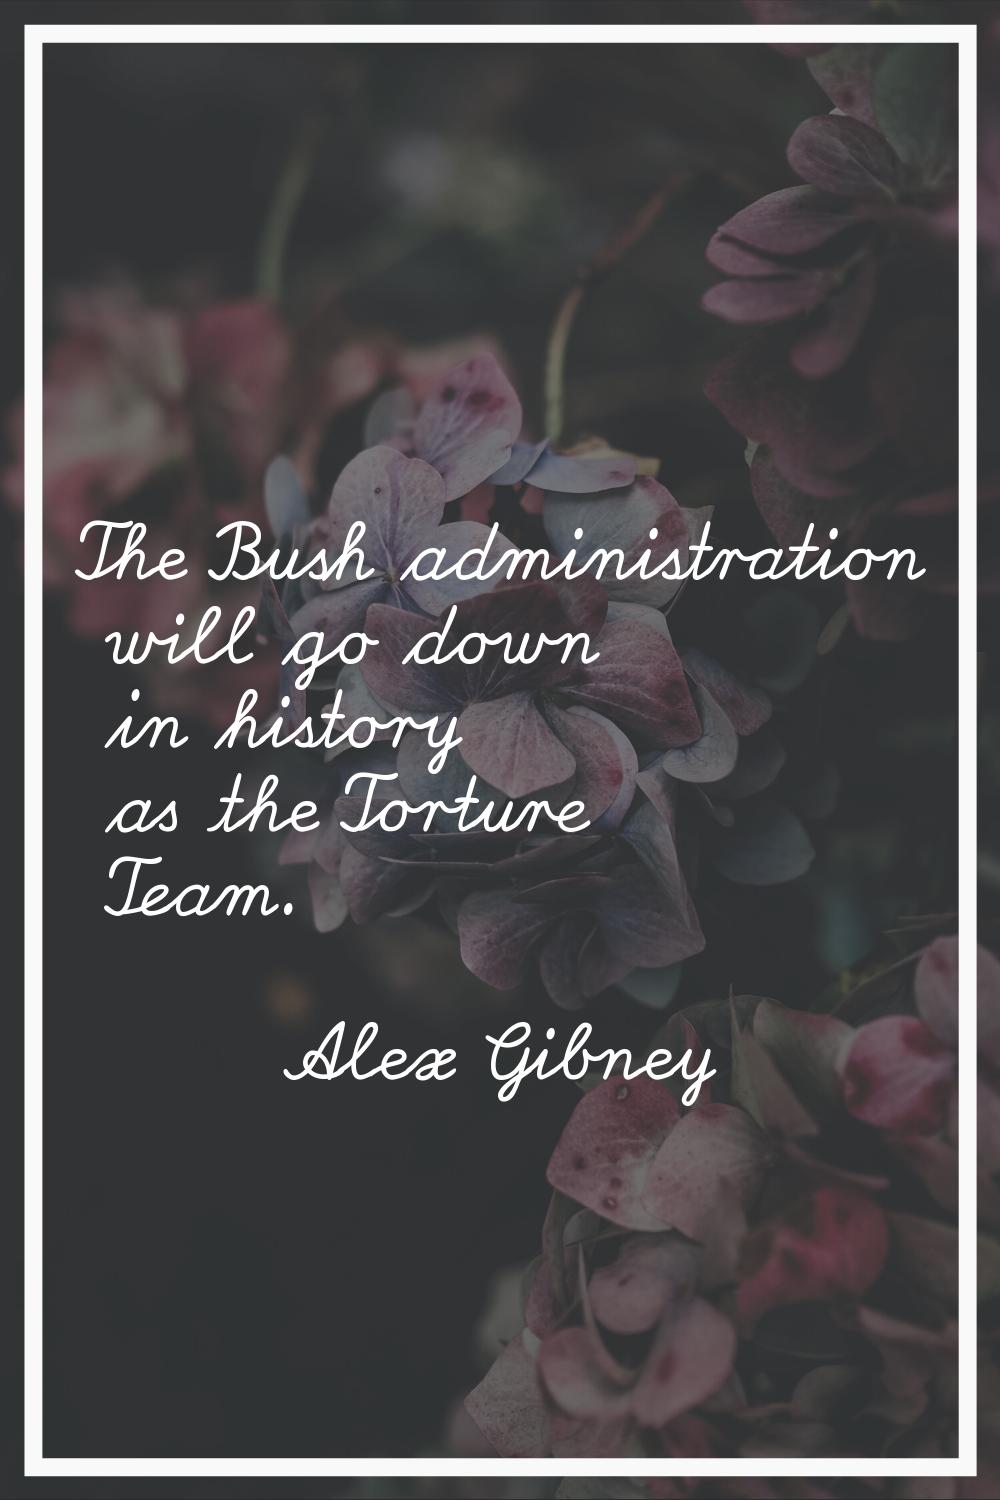 The Bush administration will go down in history as the Torture Team.